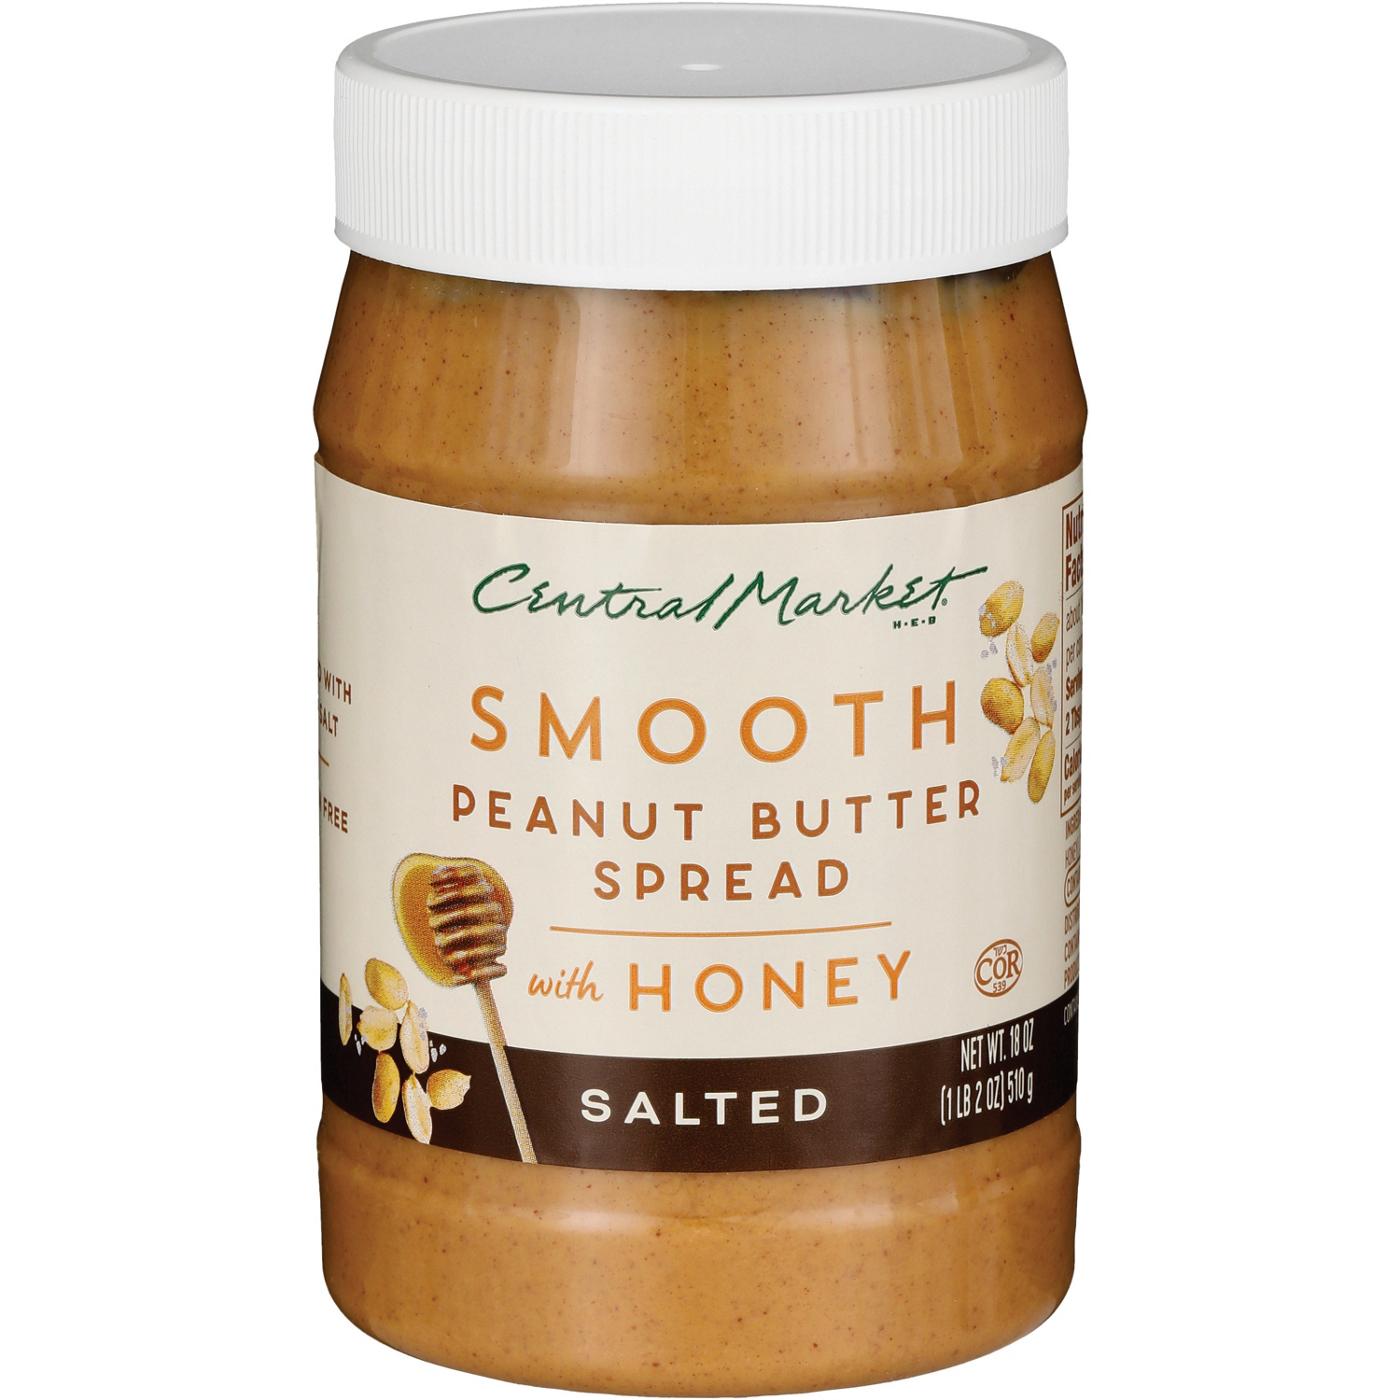 Central Market Smooth Peanut Butter with Honey - Salted; image 2 of 2